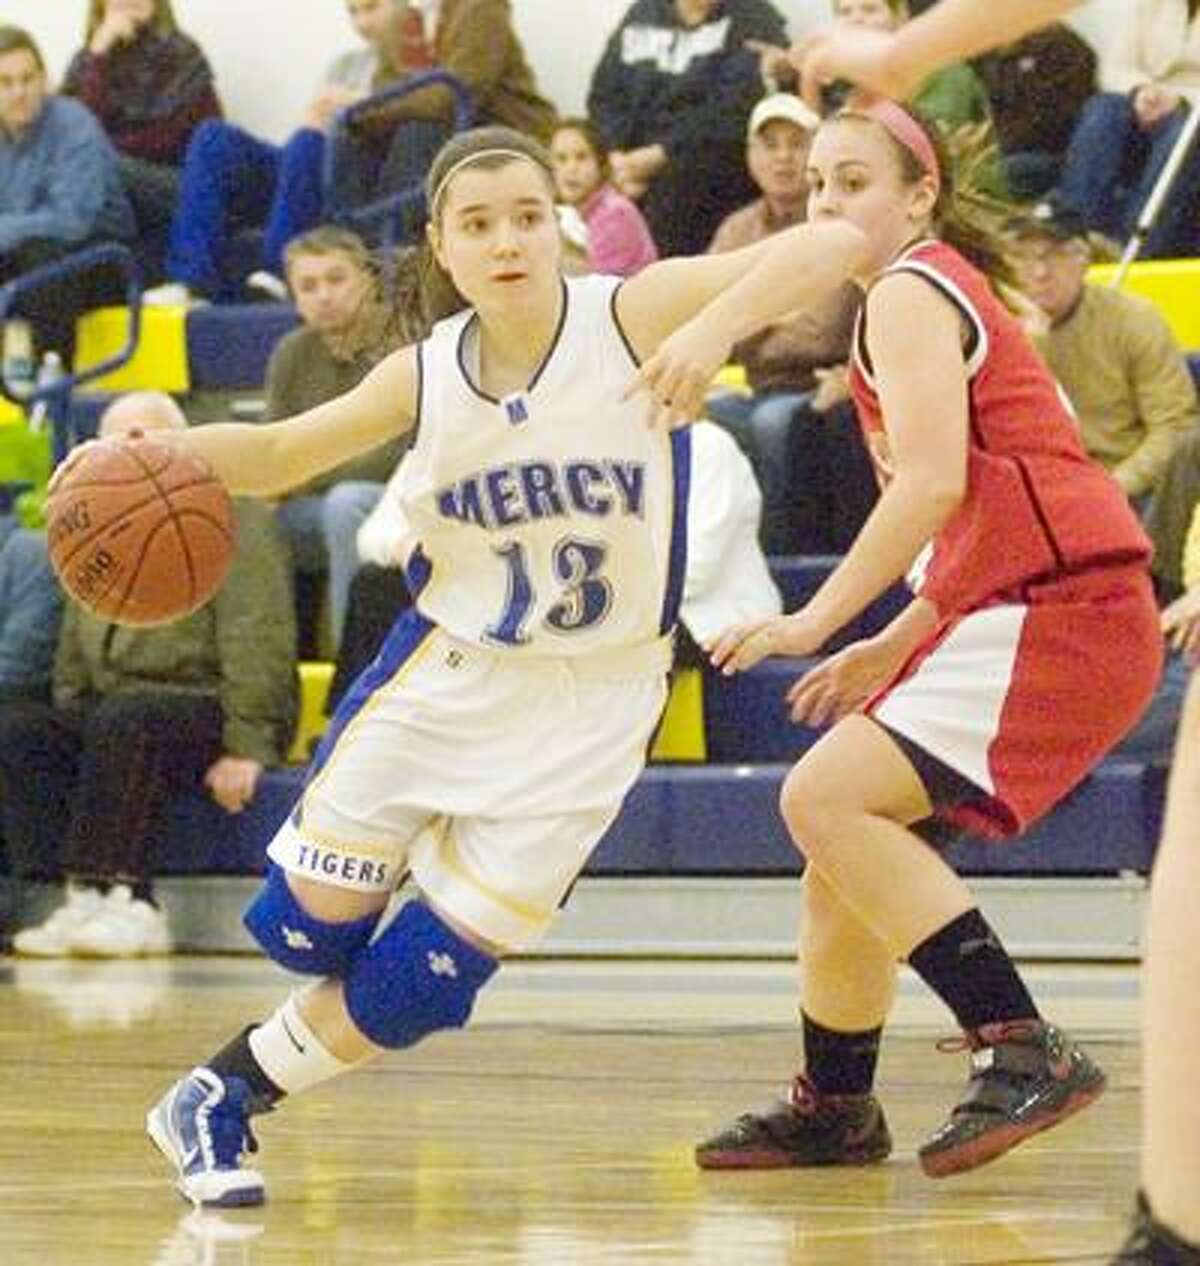 Mercy's Maria Wesleyj drives to the basket Wednesday against Cheshire at Mercy High School. (Max Steinmetz / Special to the Press)